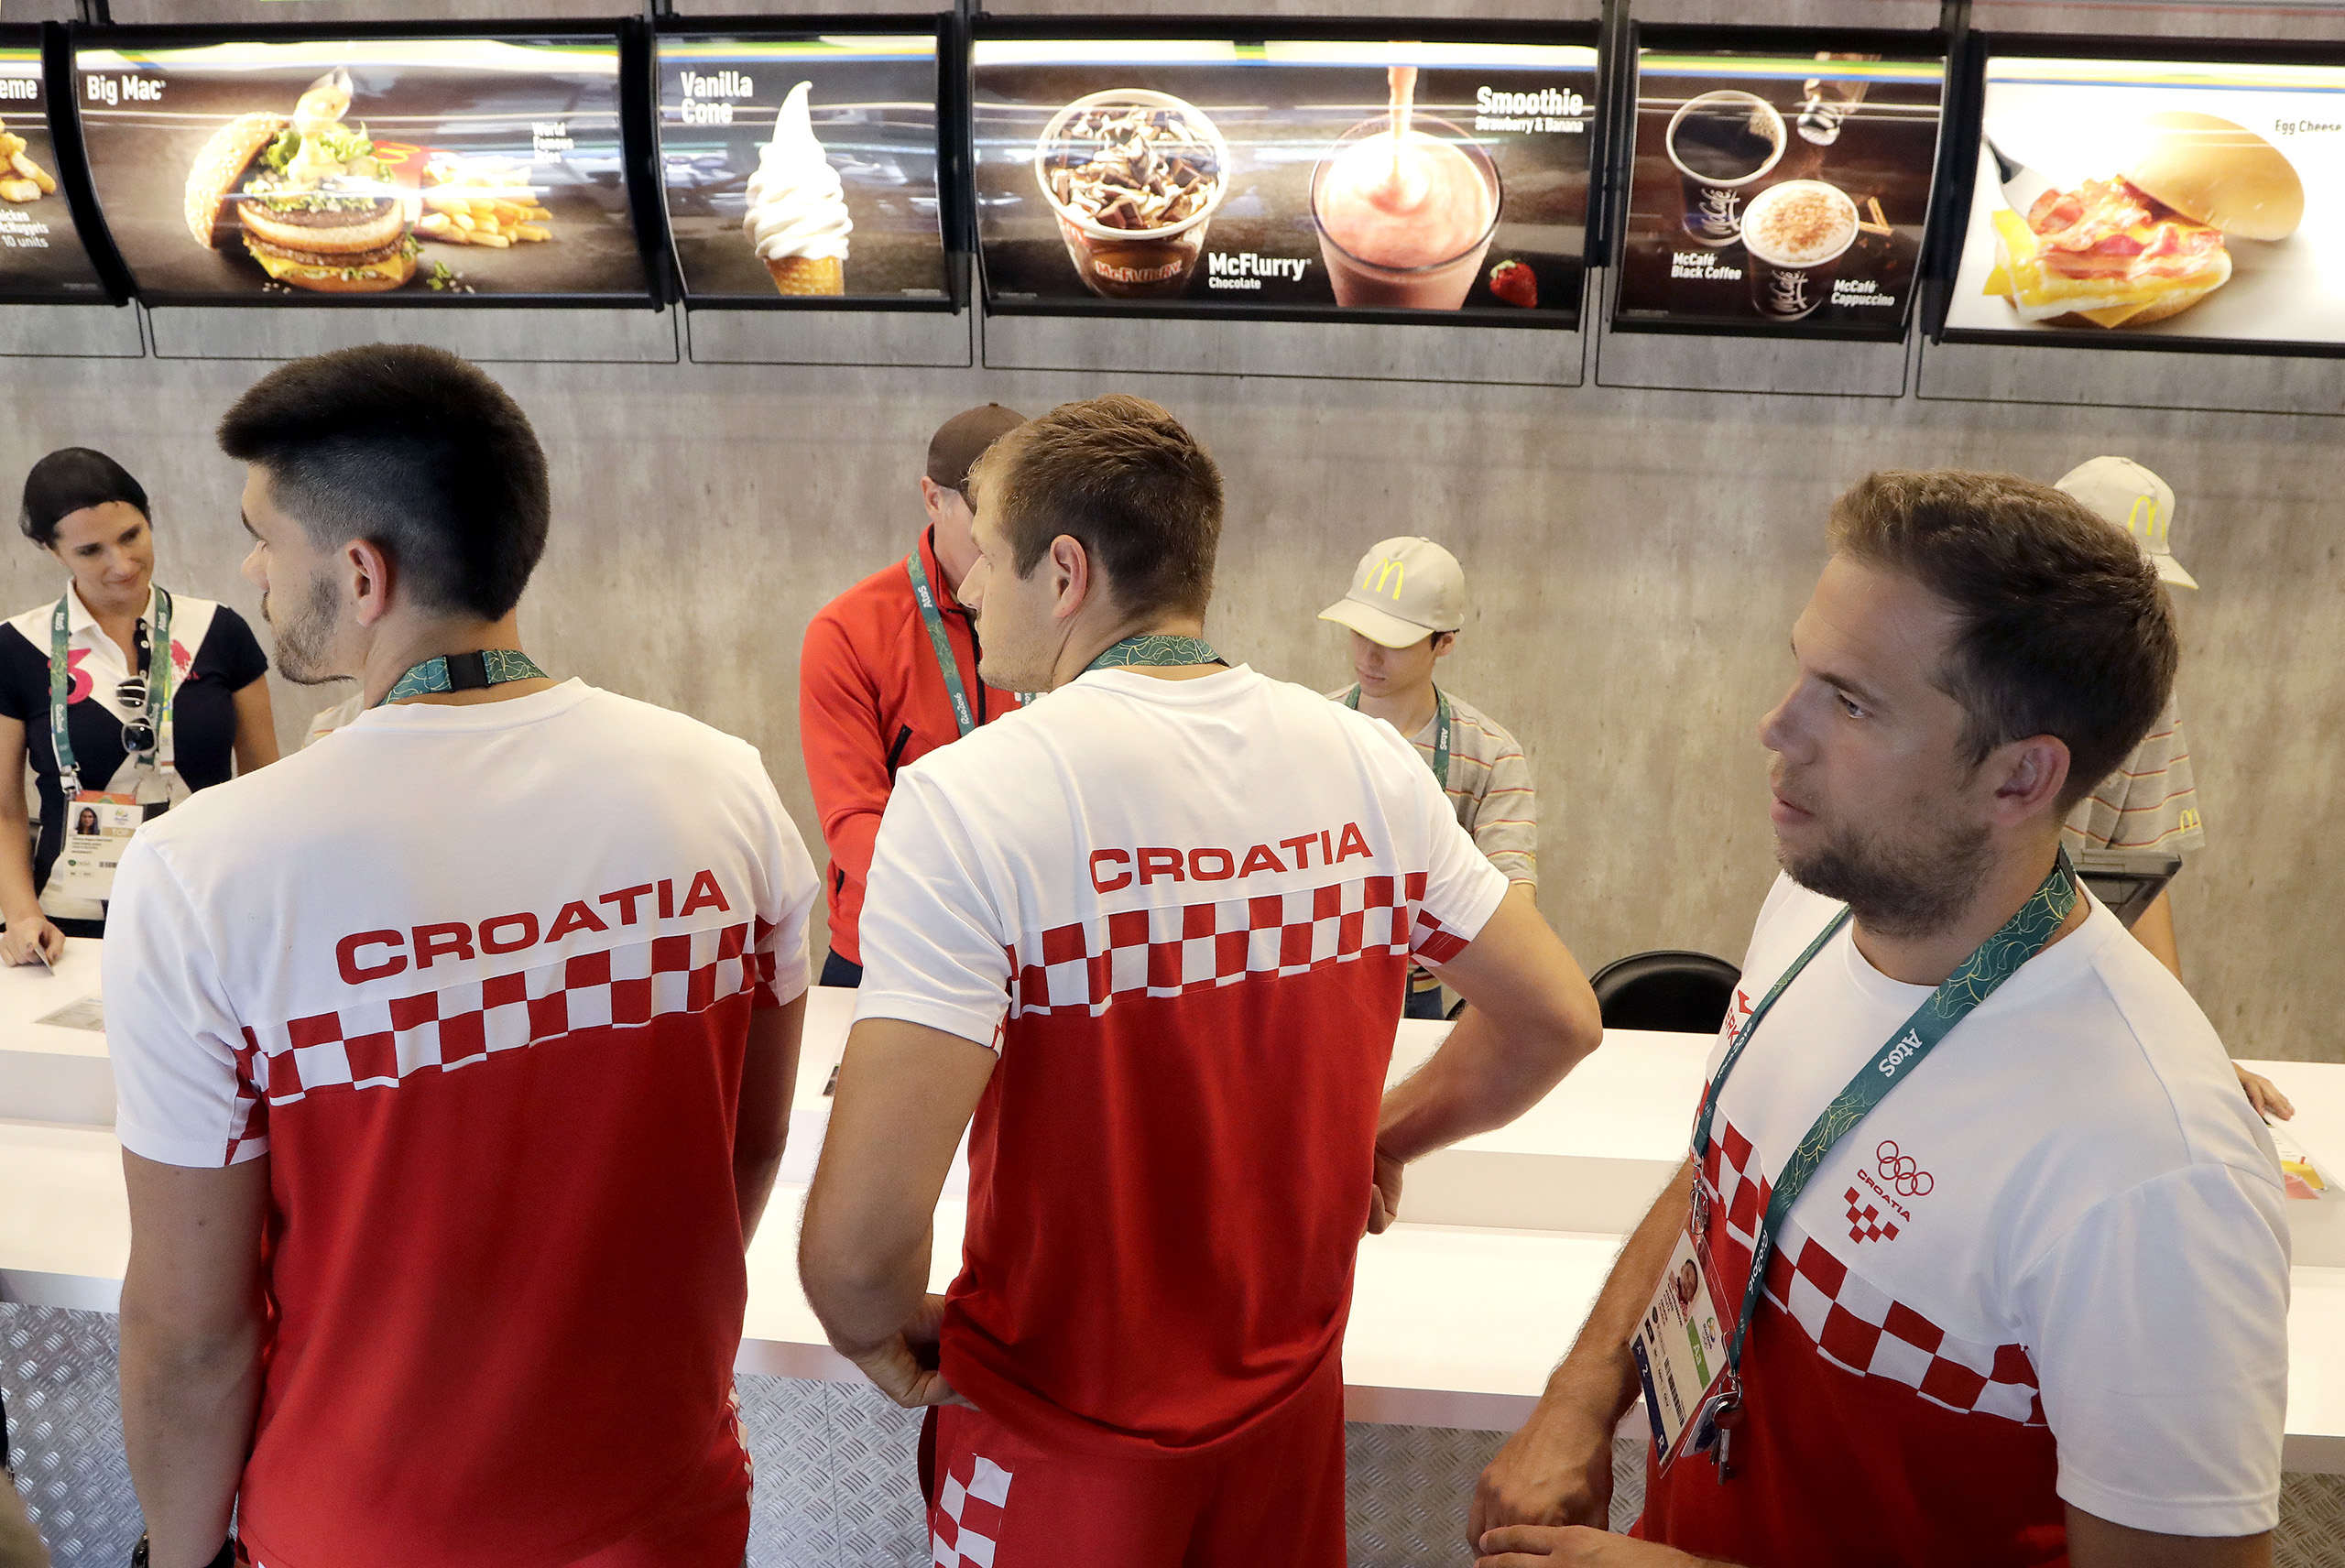 Members of the Croatian handball team wait for their meal at a McDonalds in the Olympic athletes village in Rio de Janeiro, Brazil, July 30, 2016. (Charlie Riedel—AP)